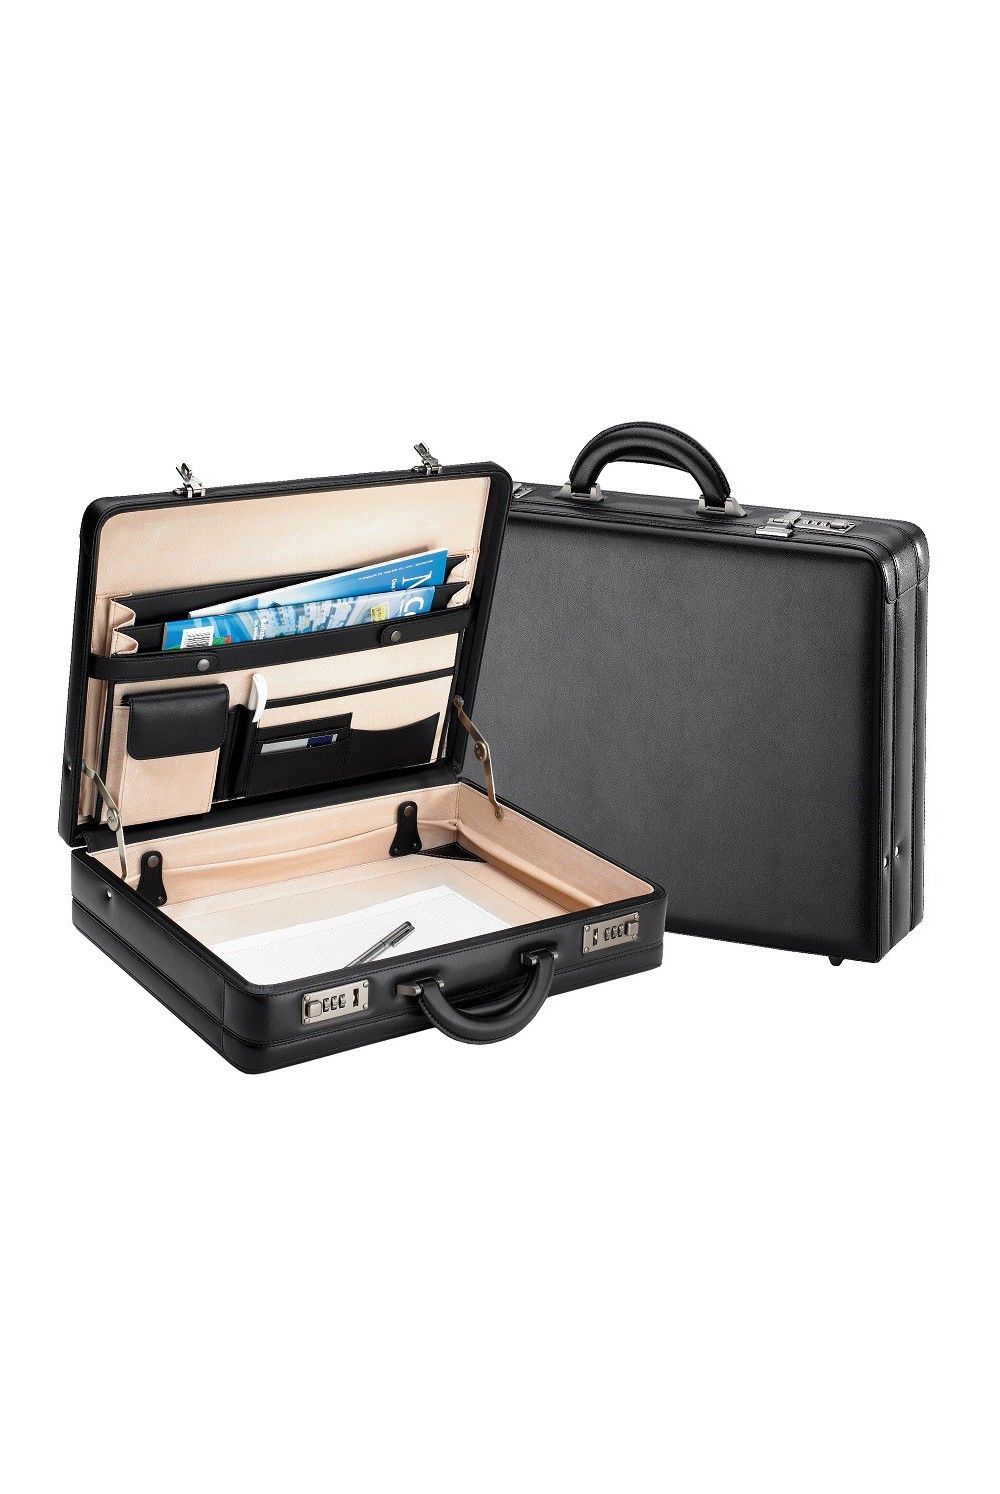 D & N briefcase leather 2632